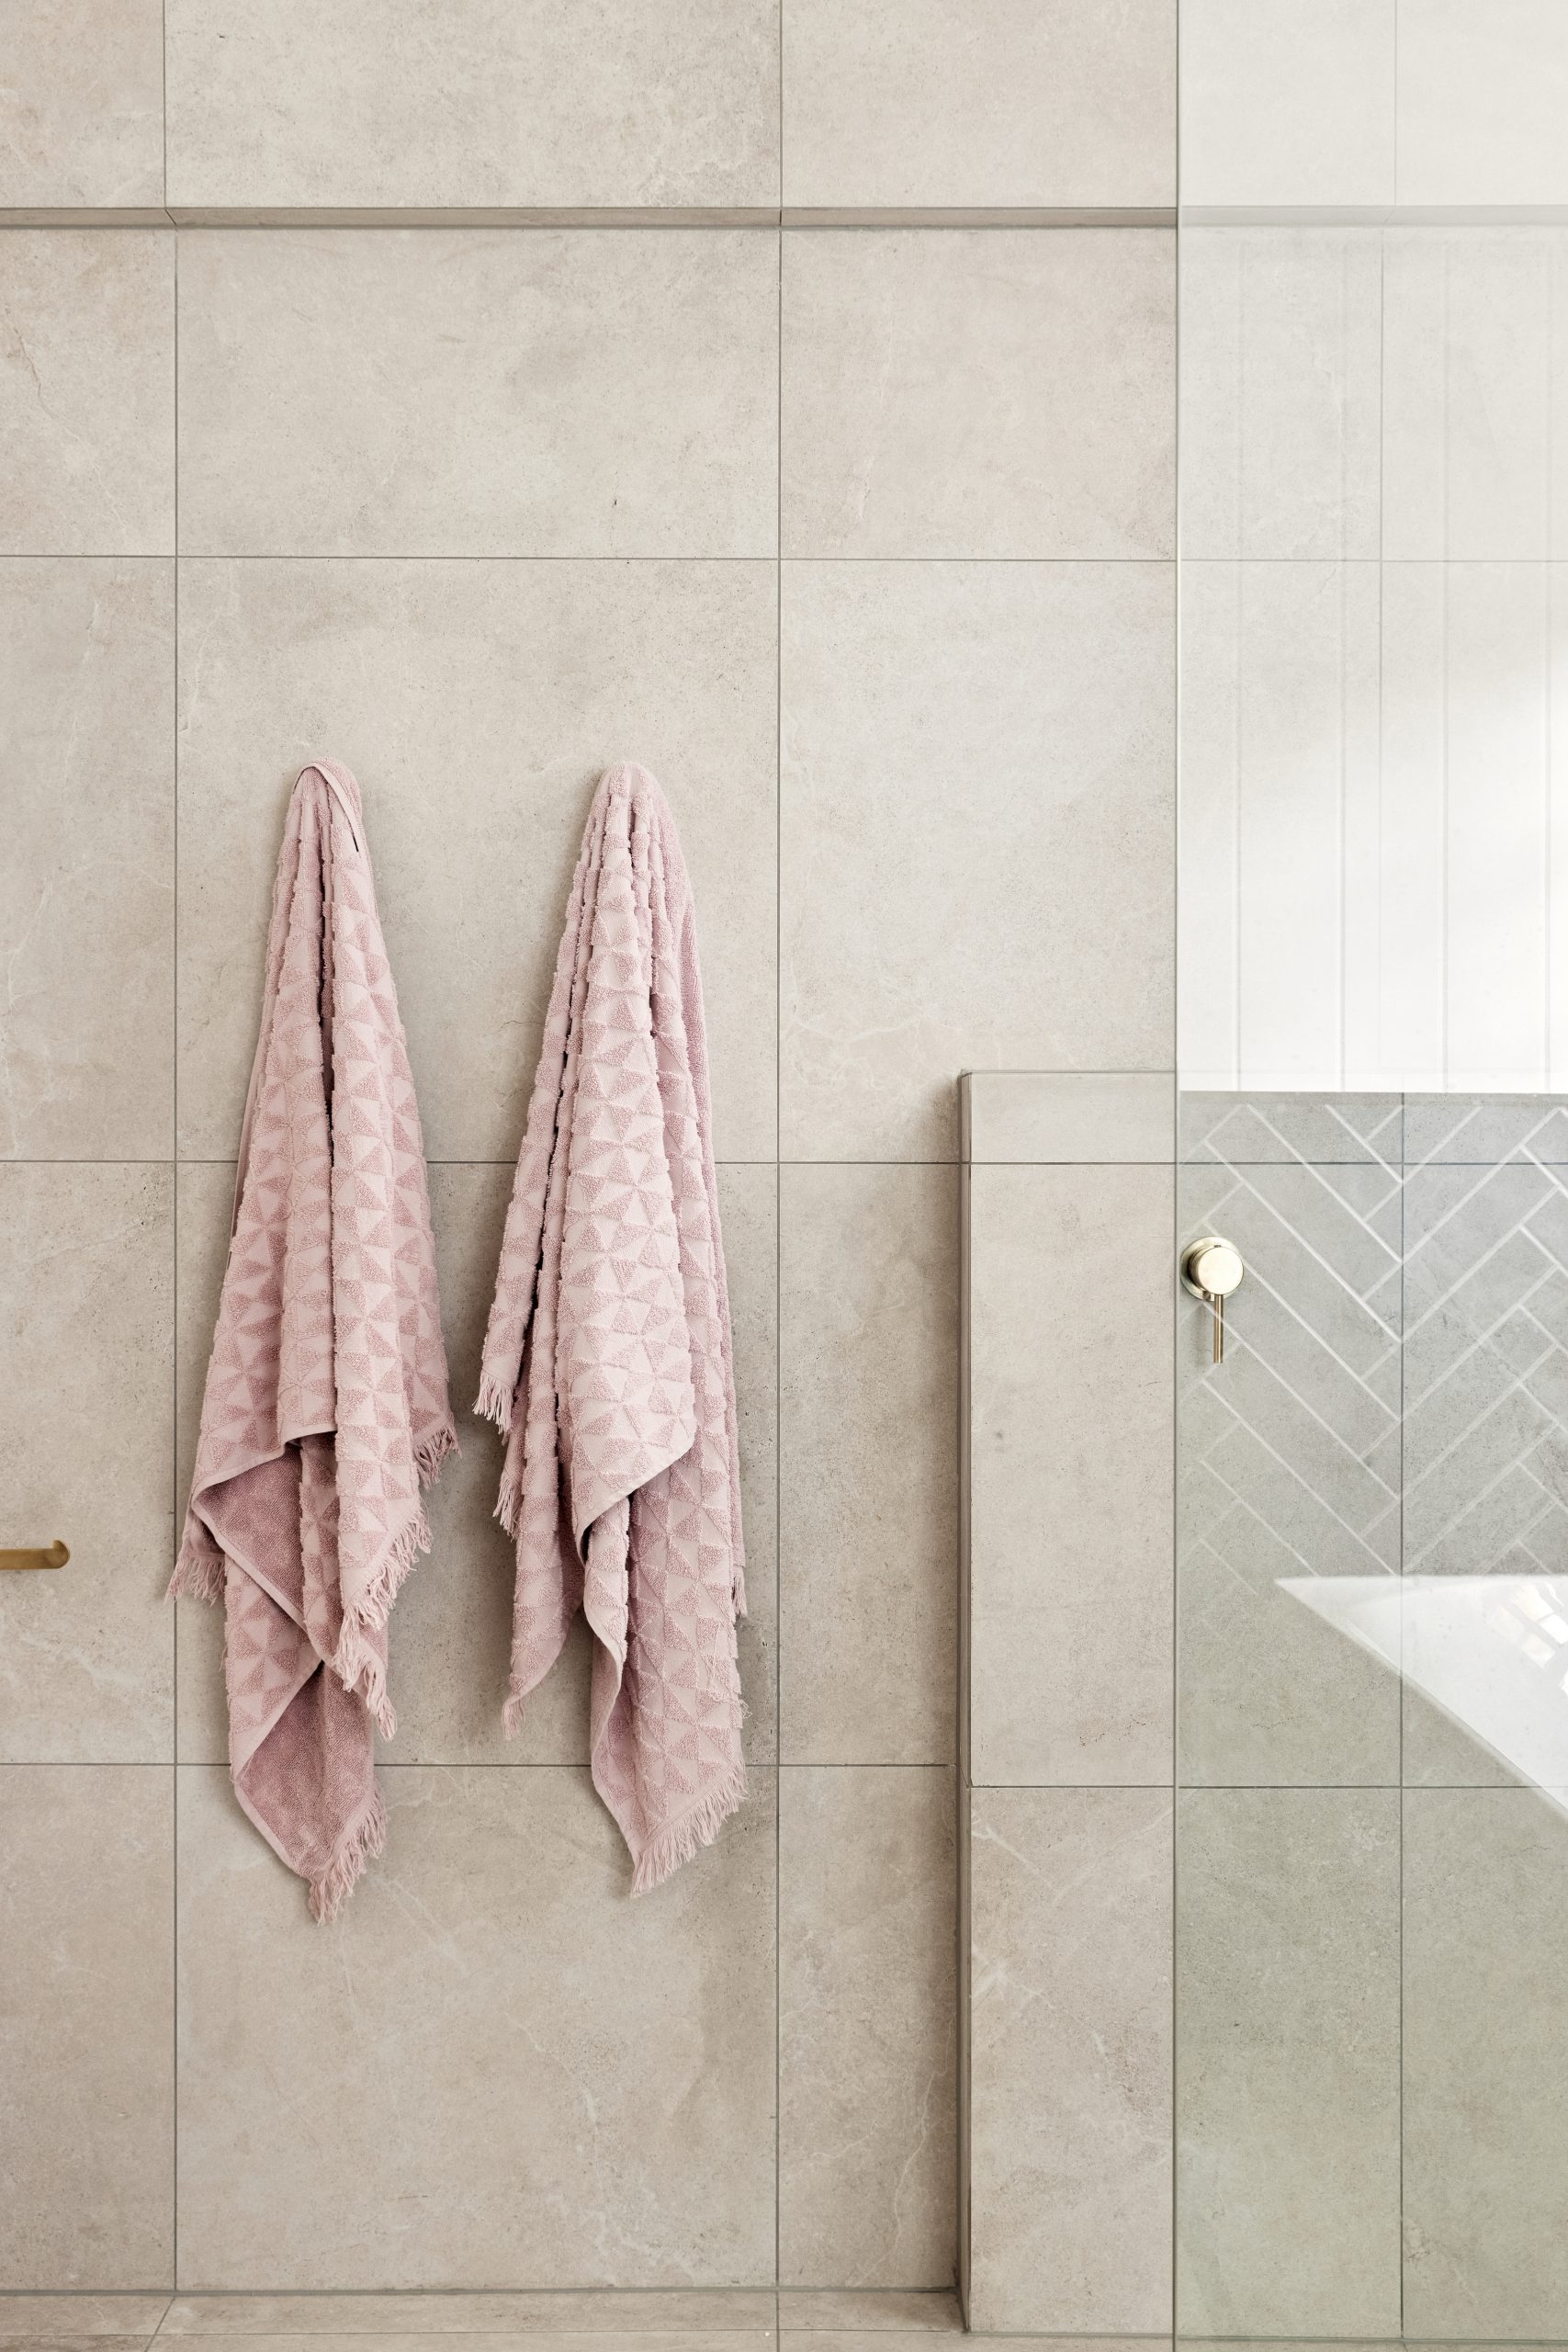 Large natural coloured bathroom tiles with pink towels hanging